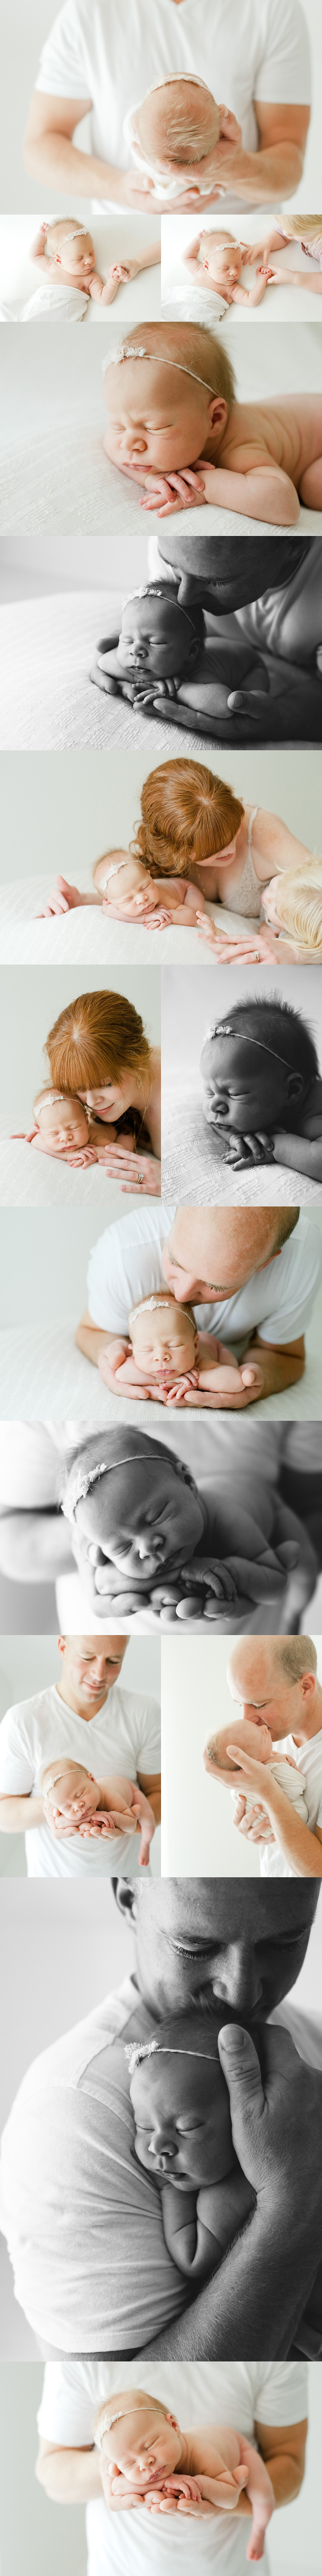 newborn baby session in studio with parents